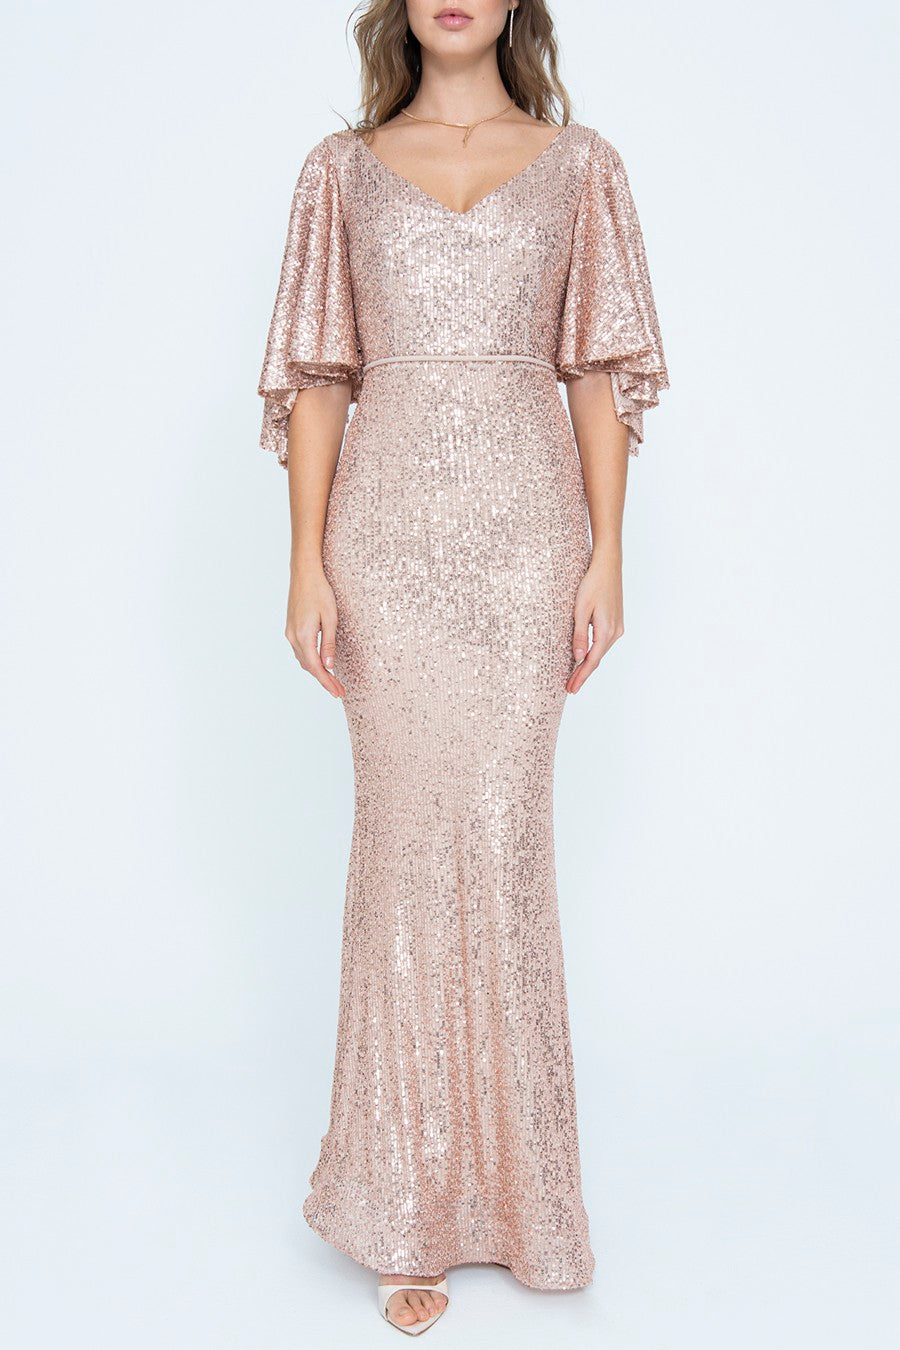 Anna - Mystic Evenings | Evening and Prom Dresses